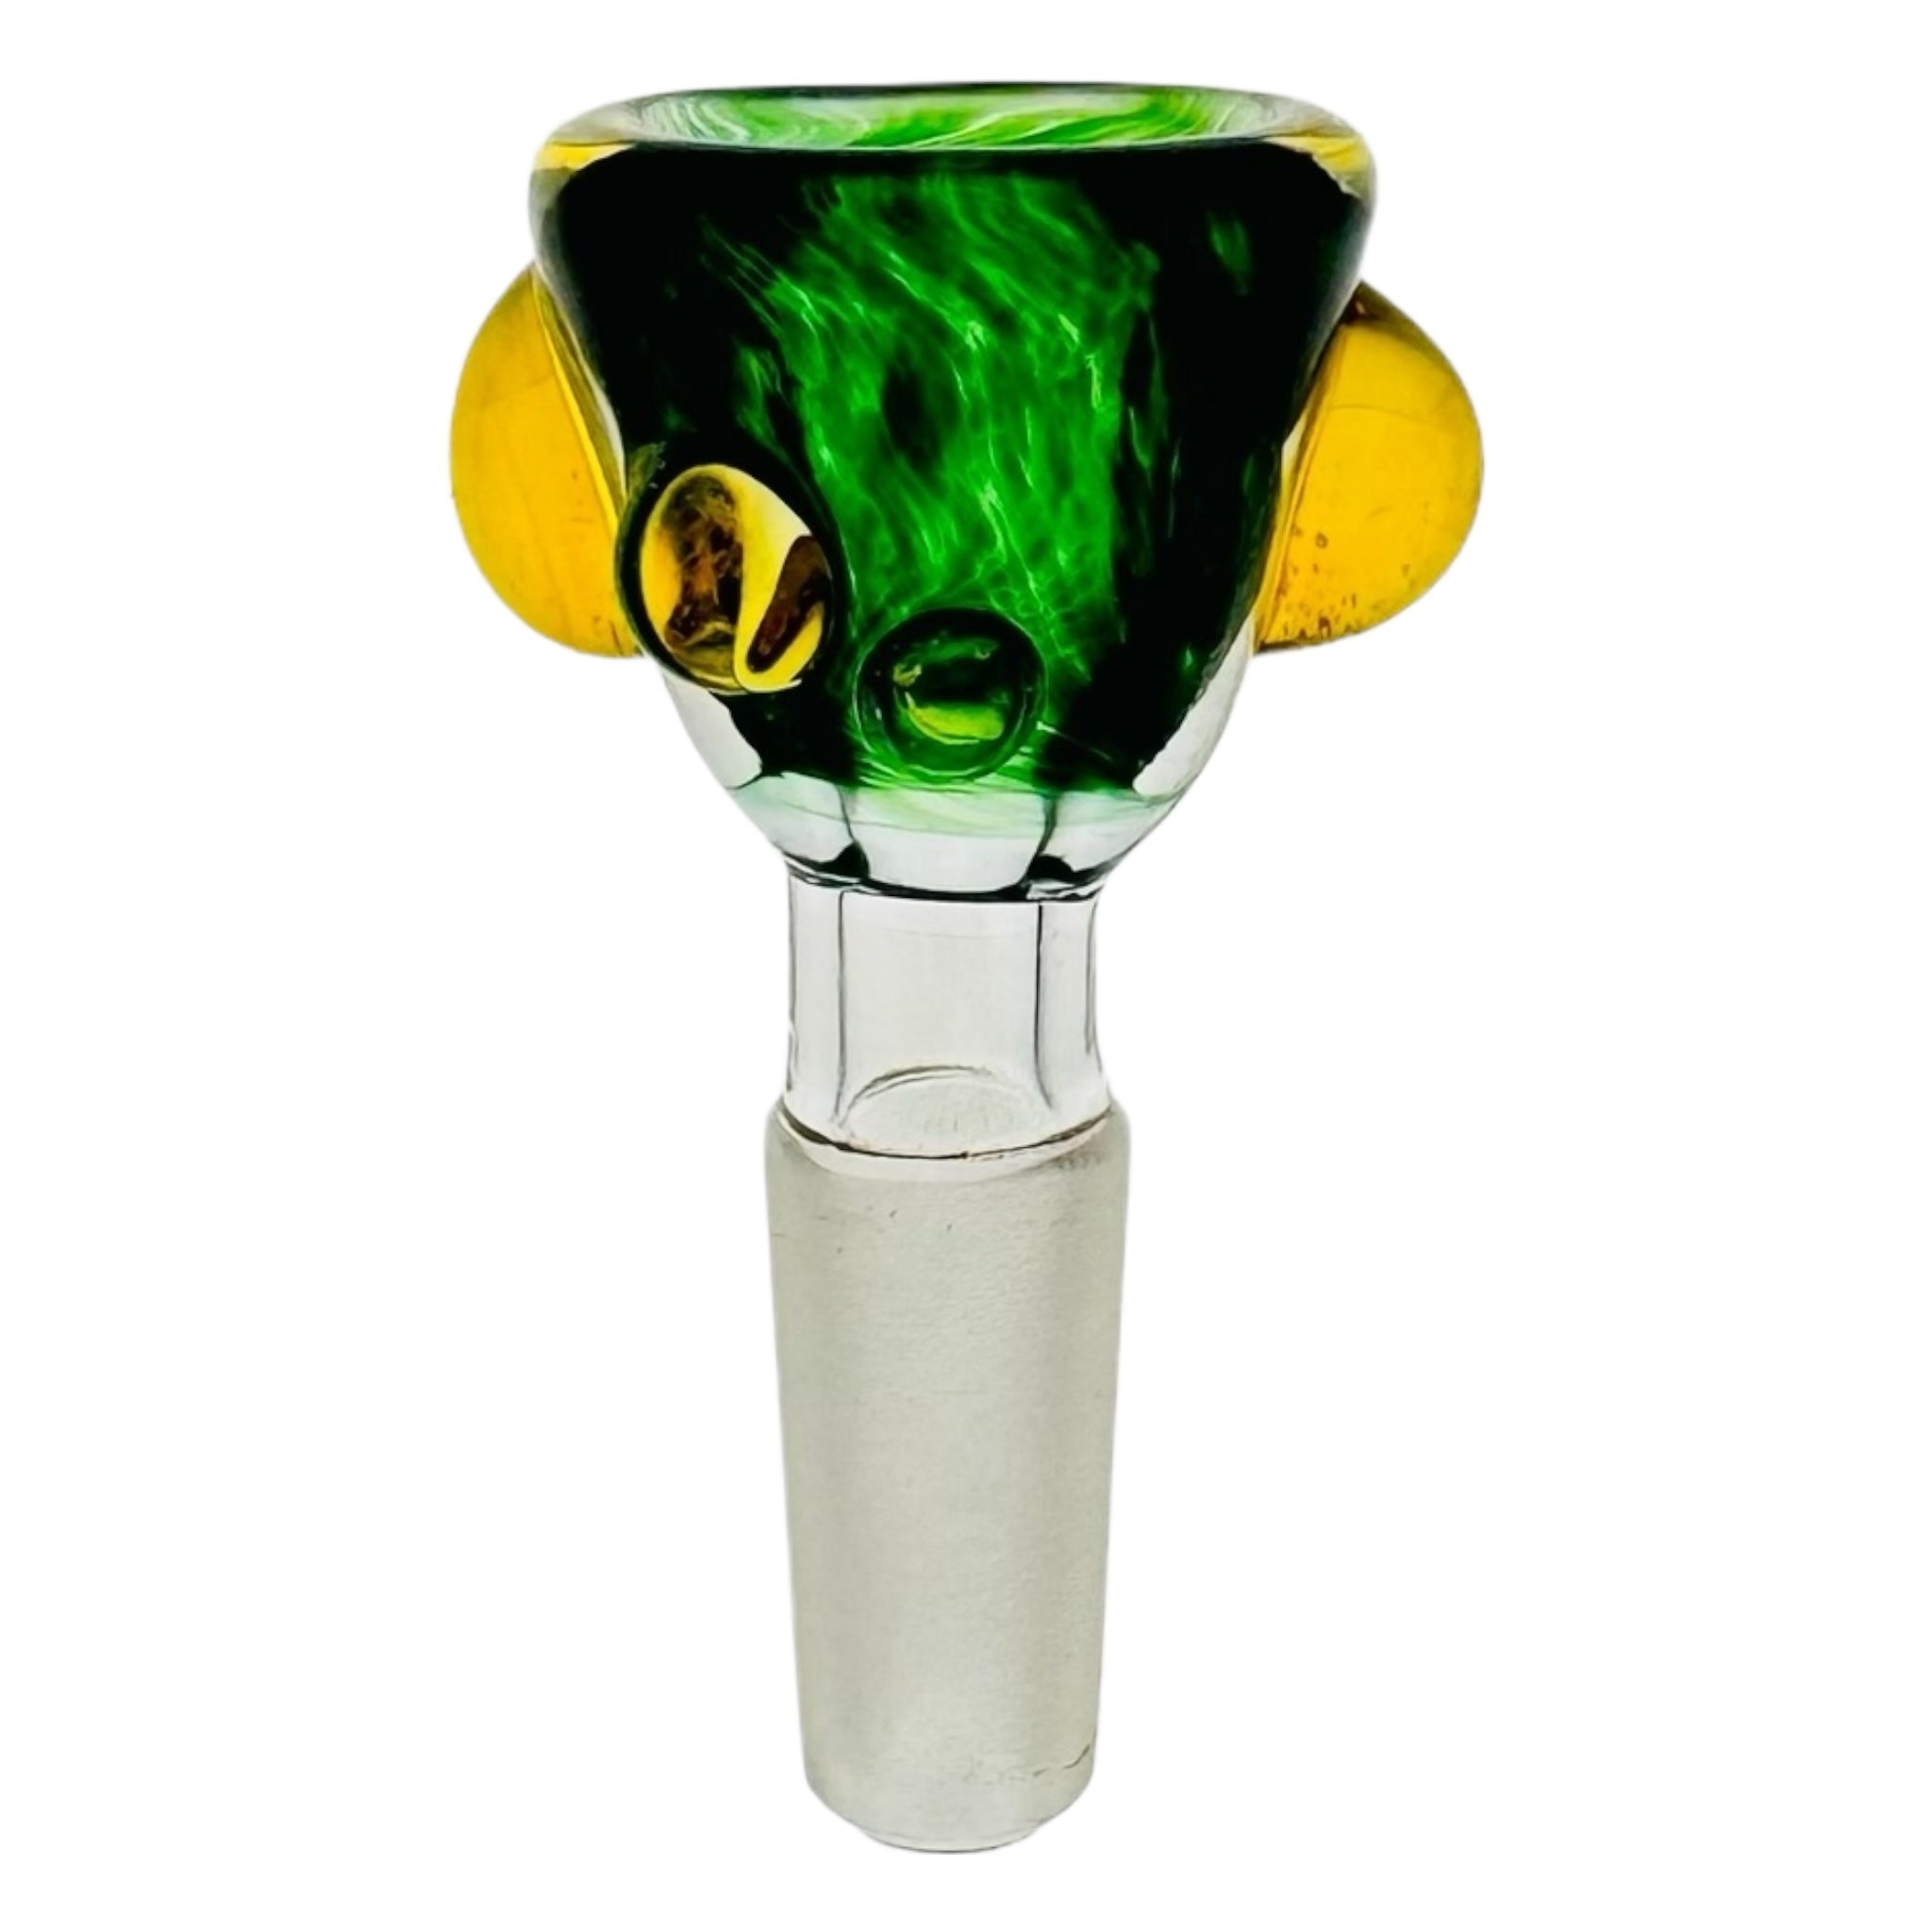 Arko Glass 10mm Flower Bowl Emerald Green Bowl With Yellow Dots